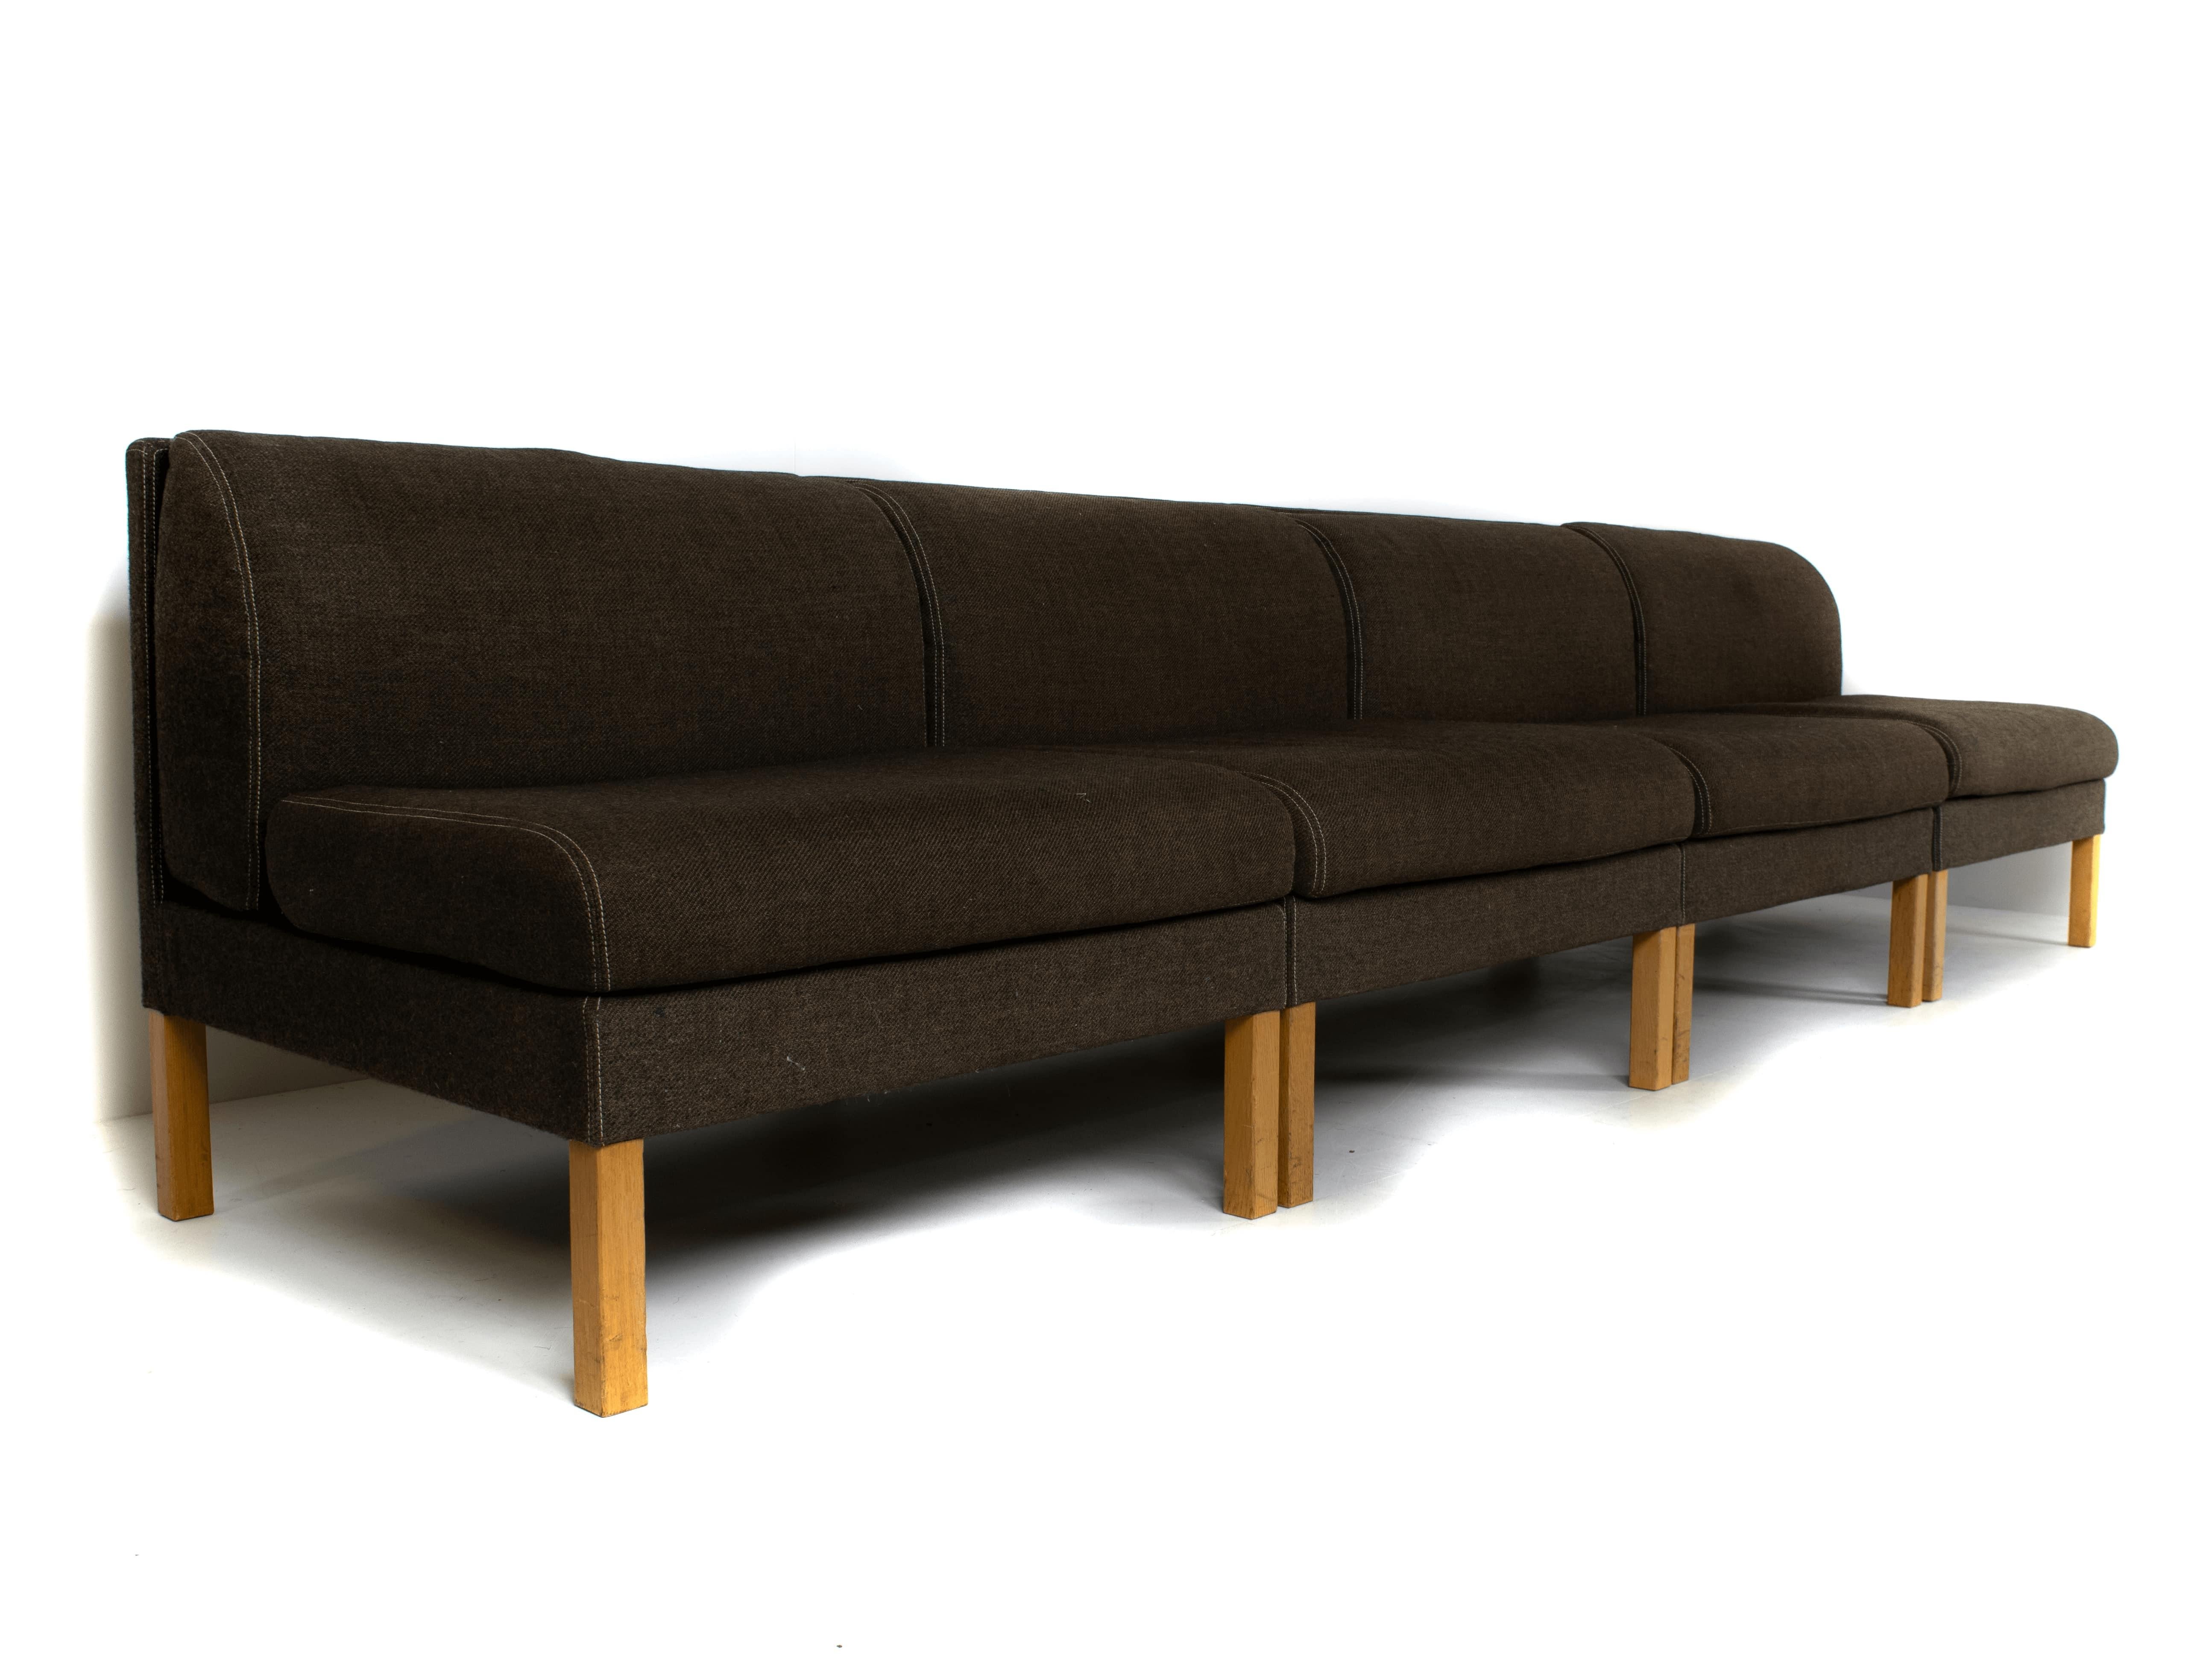 Bernt Petersen modular sofa in oak and saga 180 fabric from Denmark 1980. This modular sofa can be placed in multiple positions, in total adding to a sofa of ~316 cm. The brown/grey fabric is in good condition with only minor traces of usage. Every